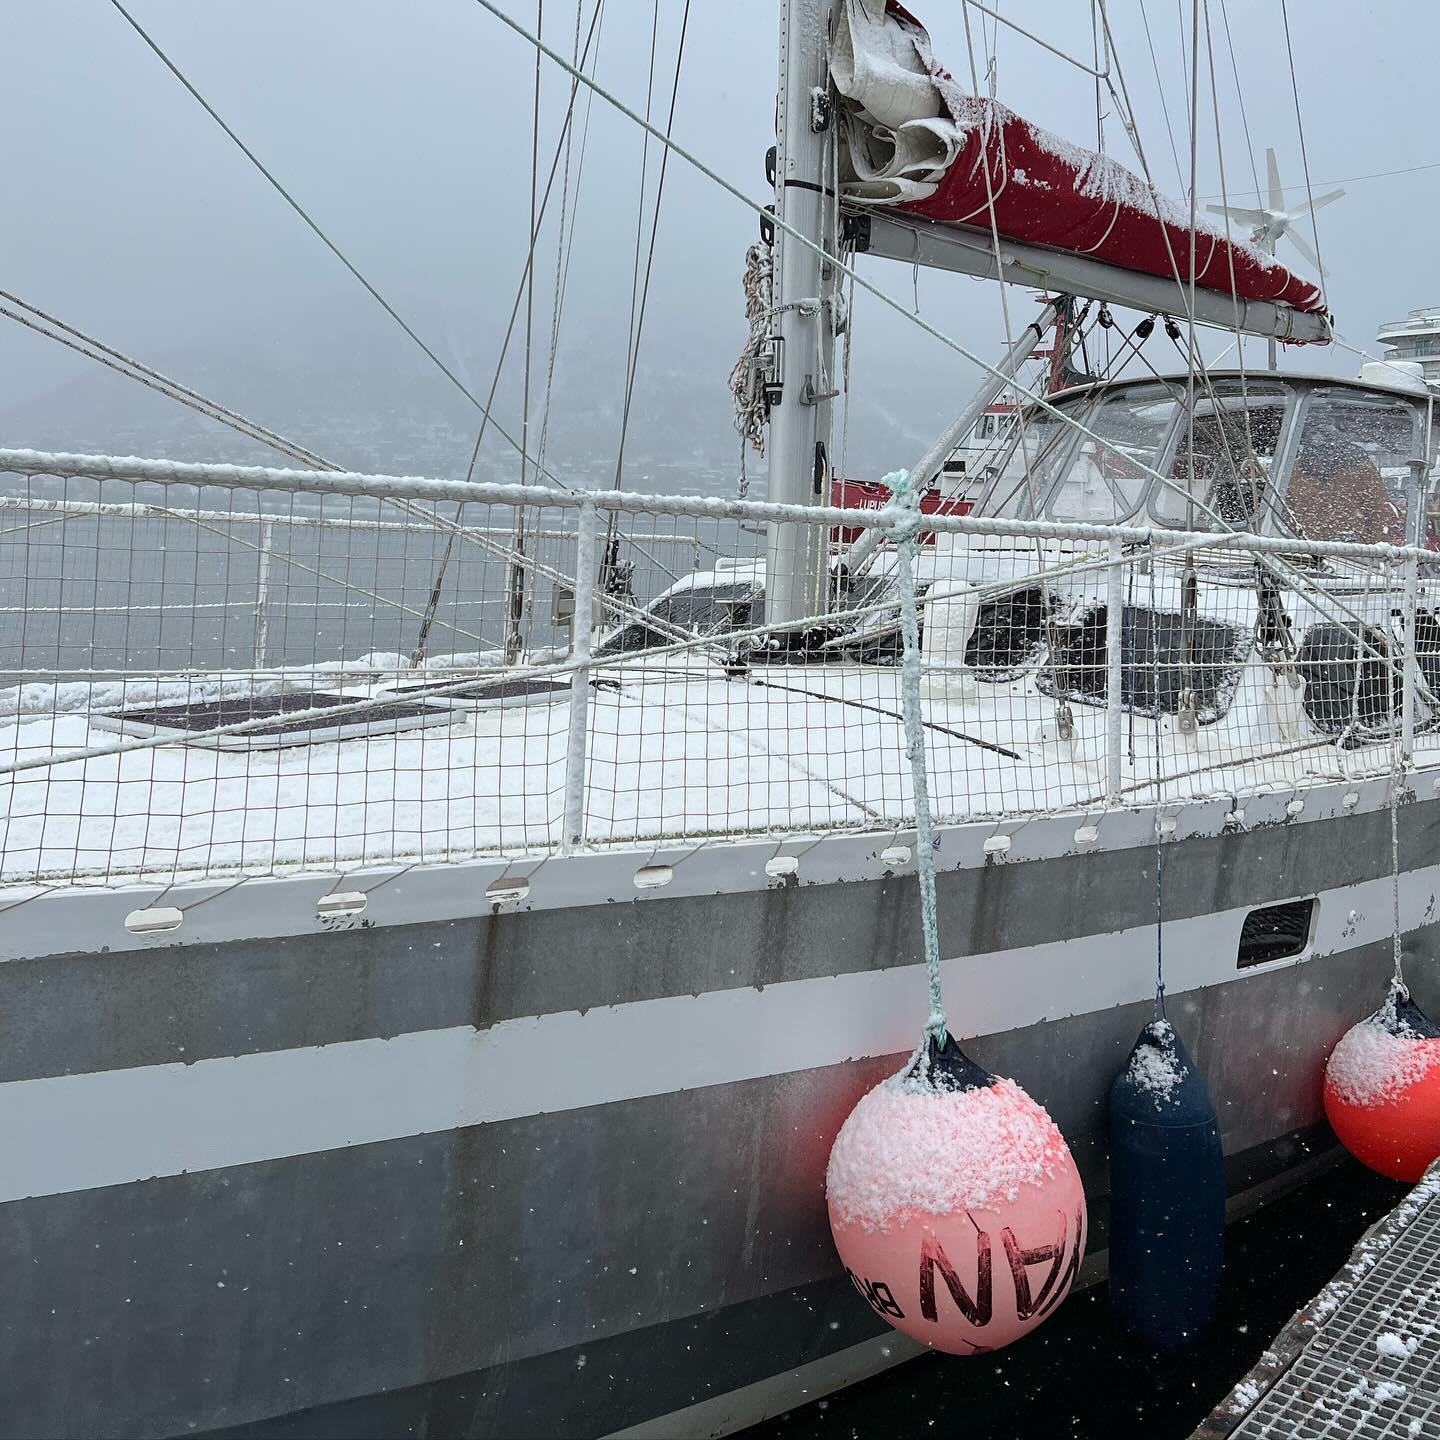 Eclectic day - snowstorms &amp; &ldquo;Na Zdrowie!&rdquo; for breakfast, polar museum for lunch. Thanks to our new Polish friends on S/V Southern Star for a warm welcome &amp; a snowball fight on the dock.

Oh, and don&rsquo;t forget to watch out for